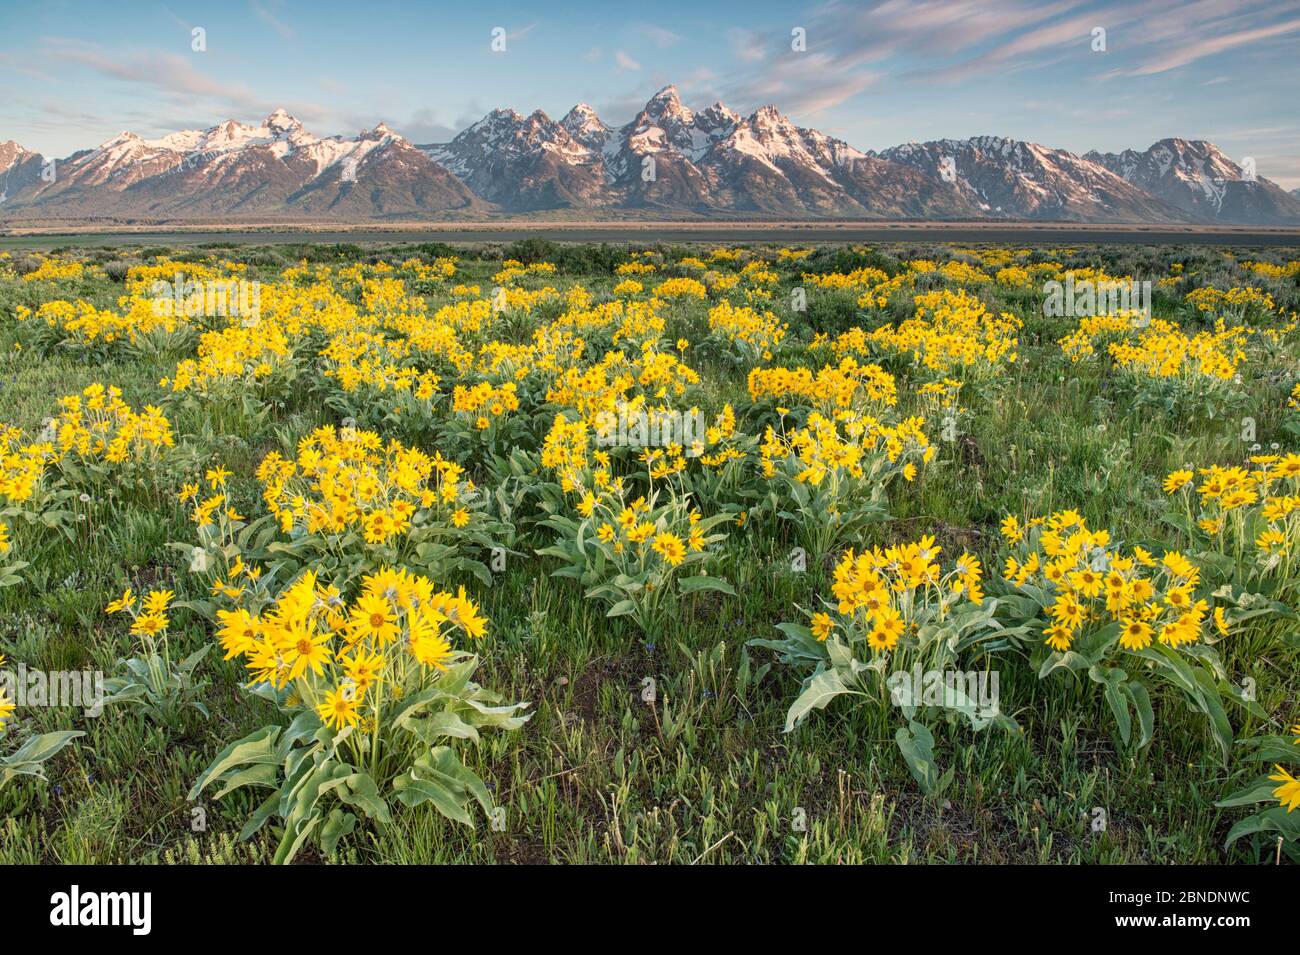 Arrowleaf balsmroot (Balsamorhiza sagittata) blooming with the Greand Tetons in the background. Grand Teton National Park, Wyoming, USA, June. Stock Photo